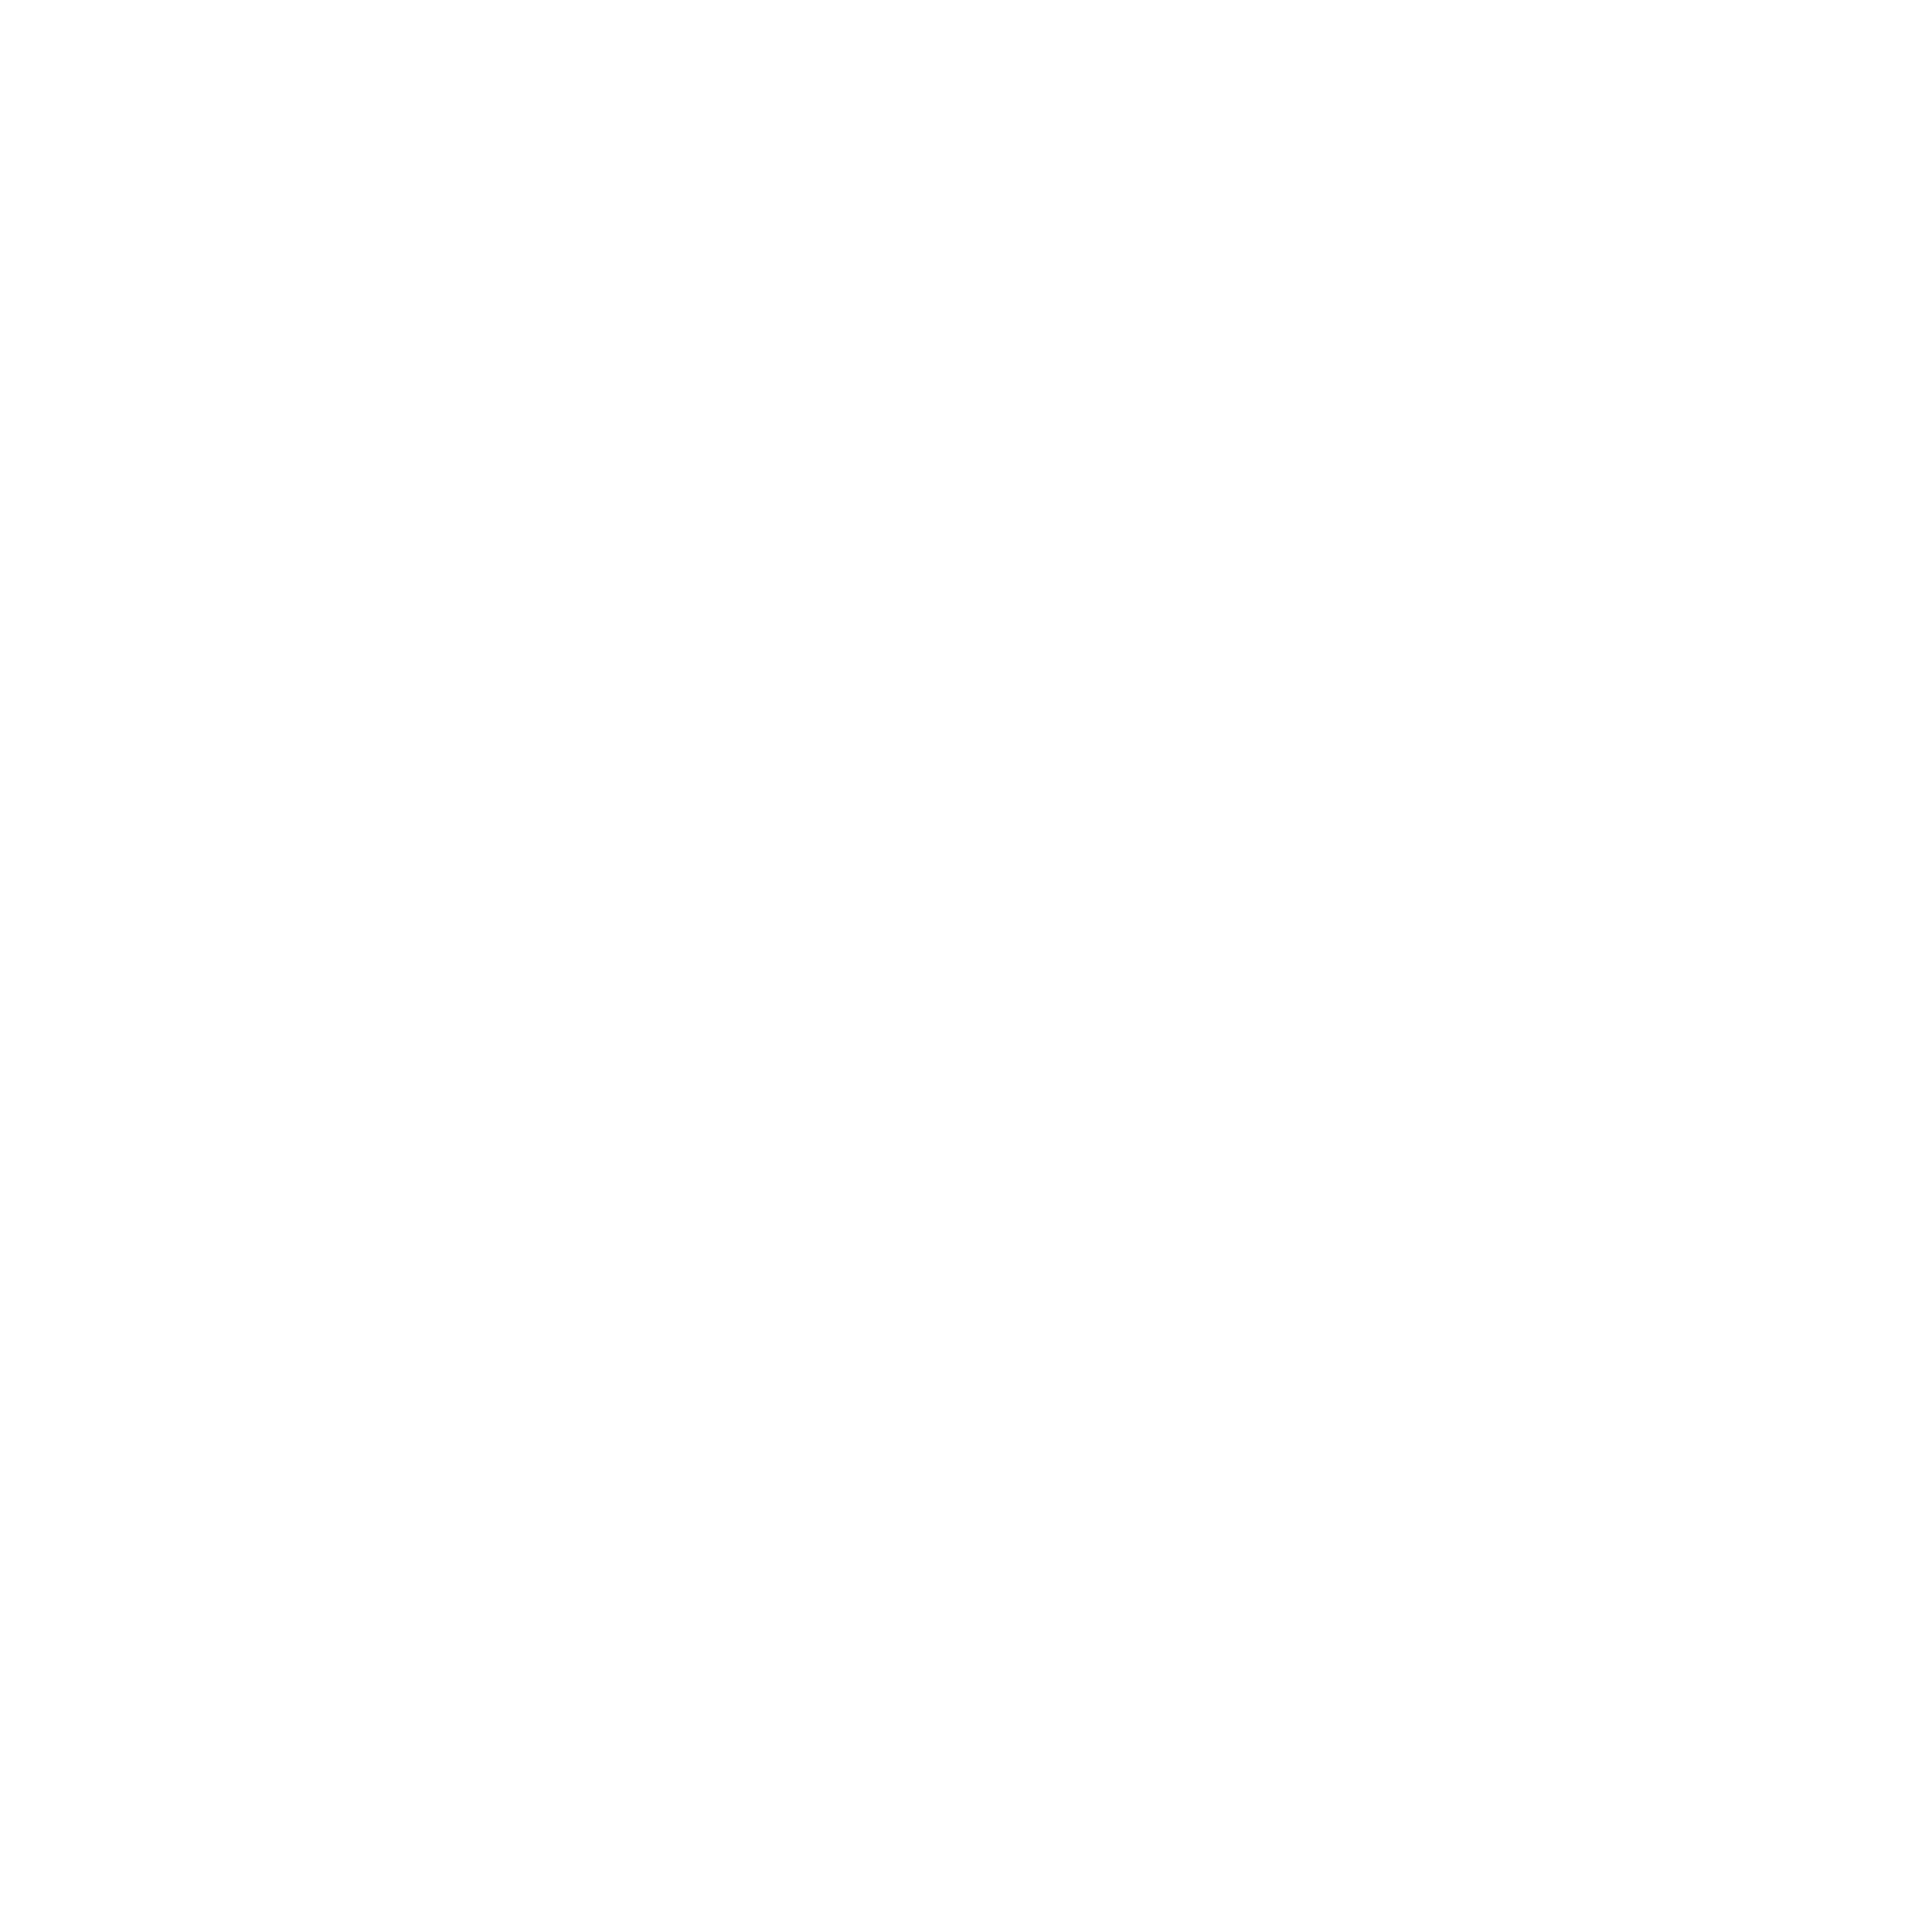 Serve and Toss